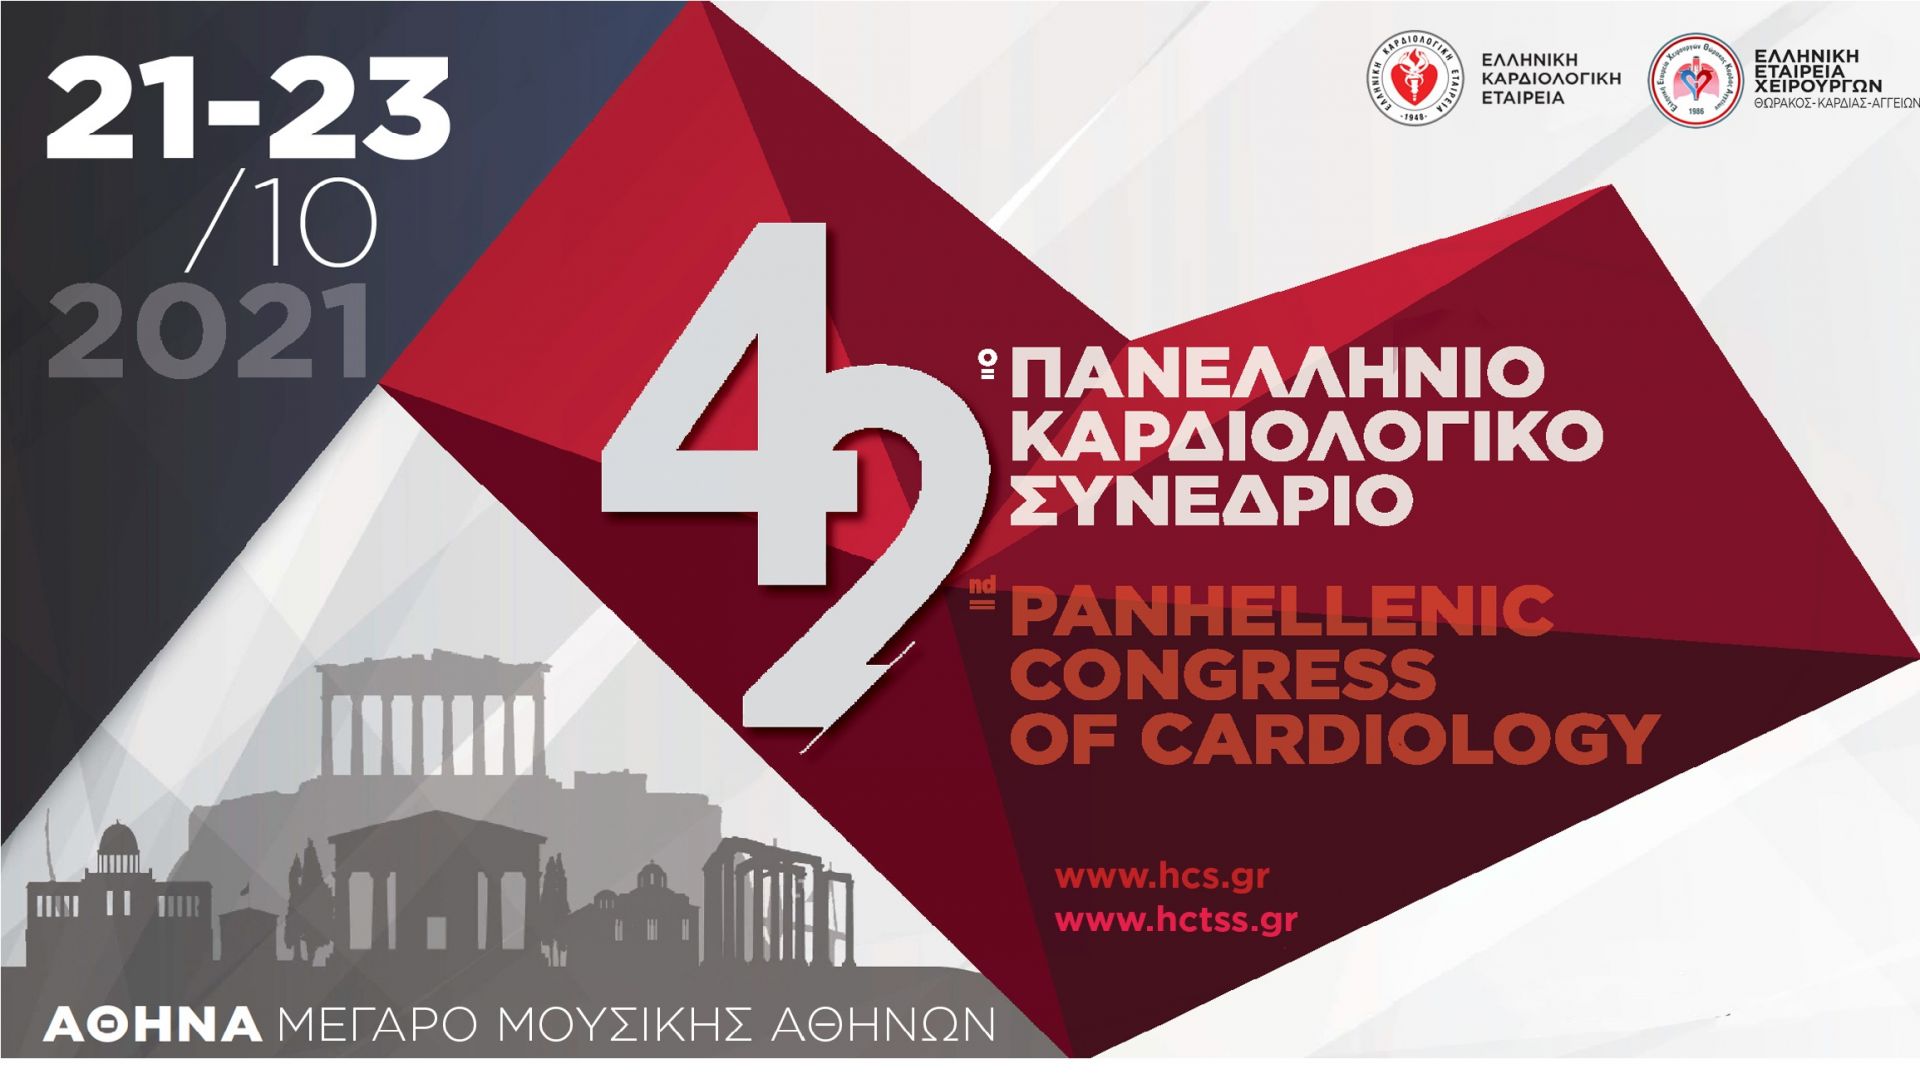 42nd Panhellenic Congress of Cardiology